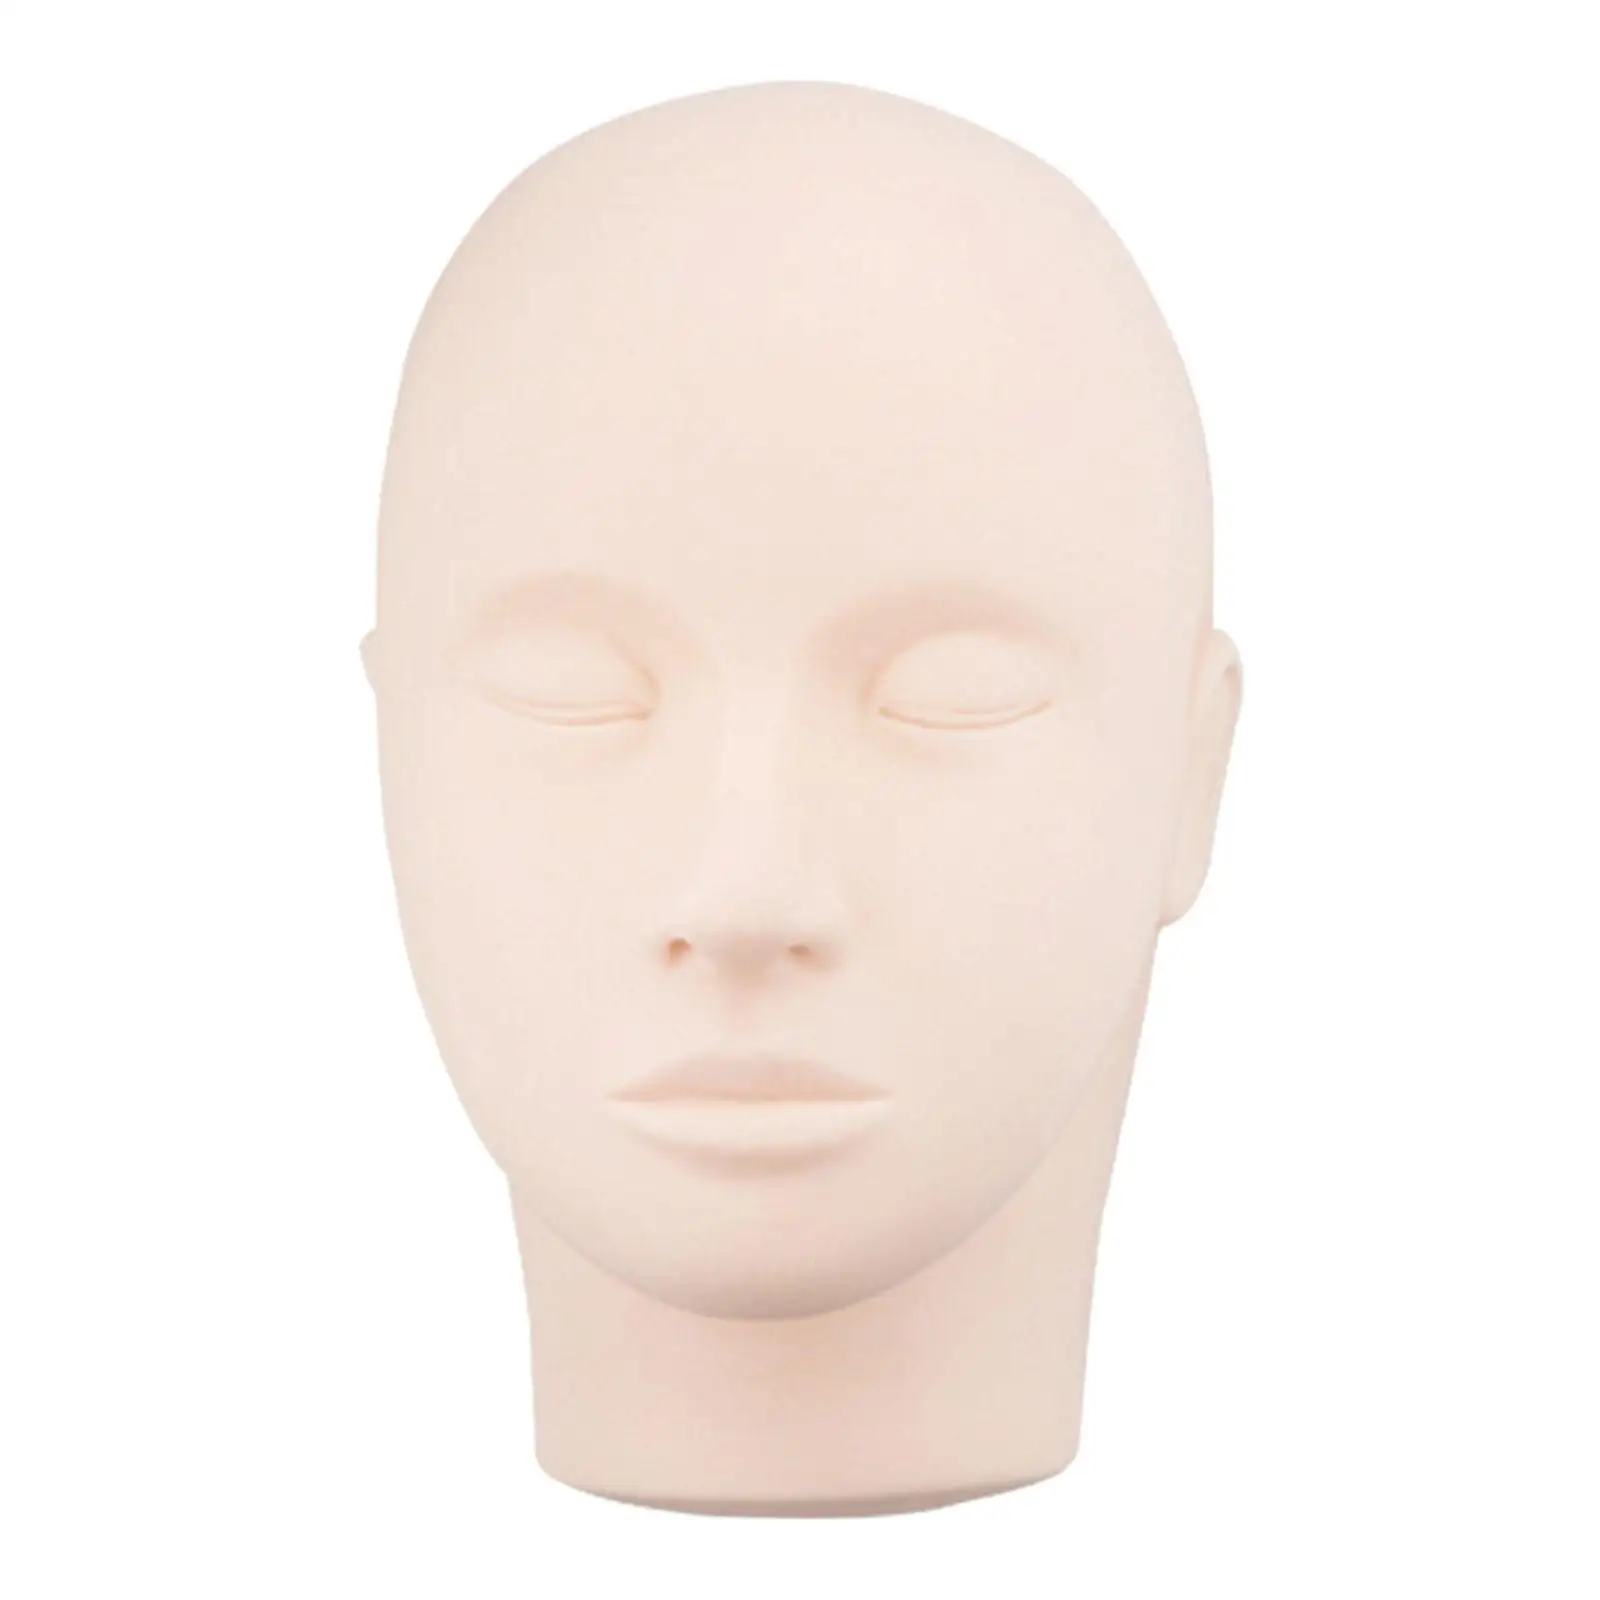 Extension Silicone Head Extension Supplies Practice Touch Model Head for